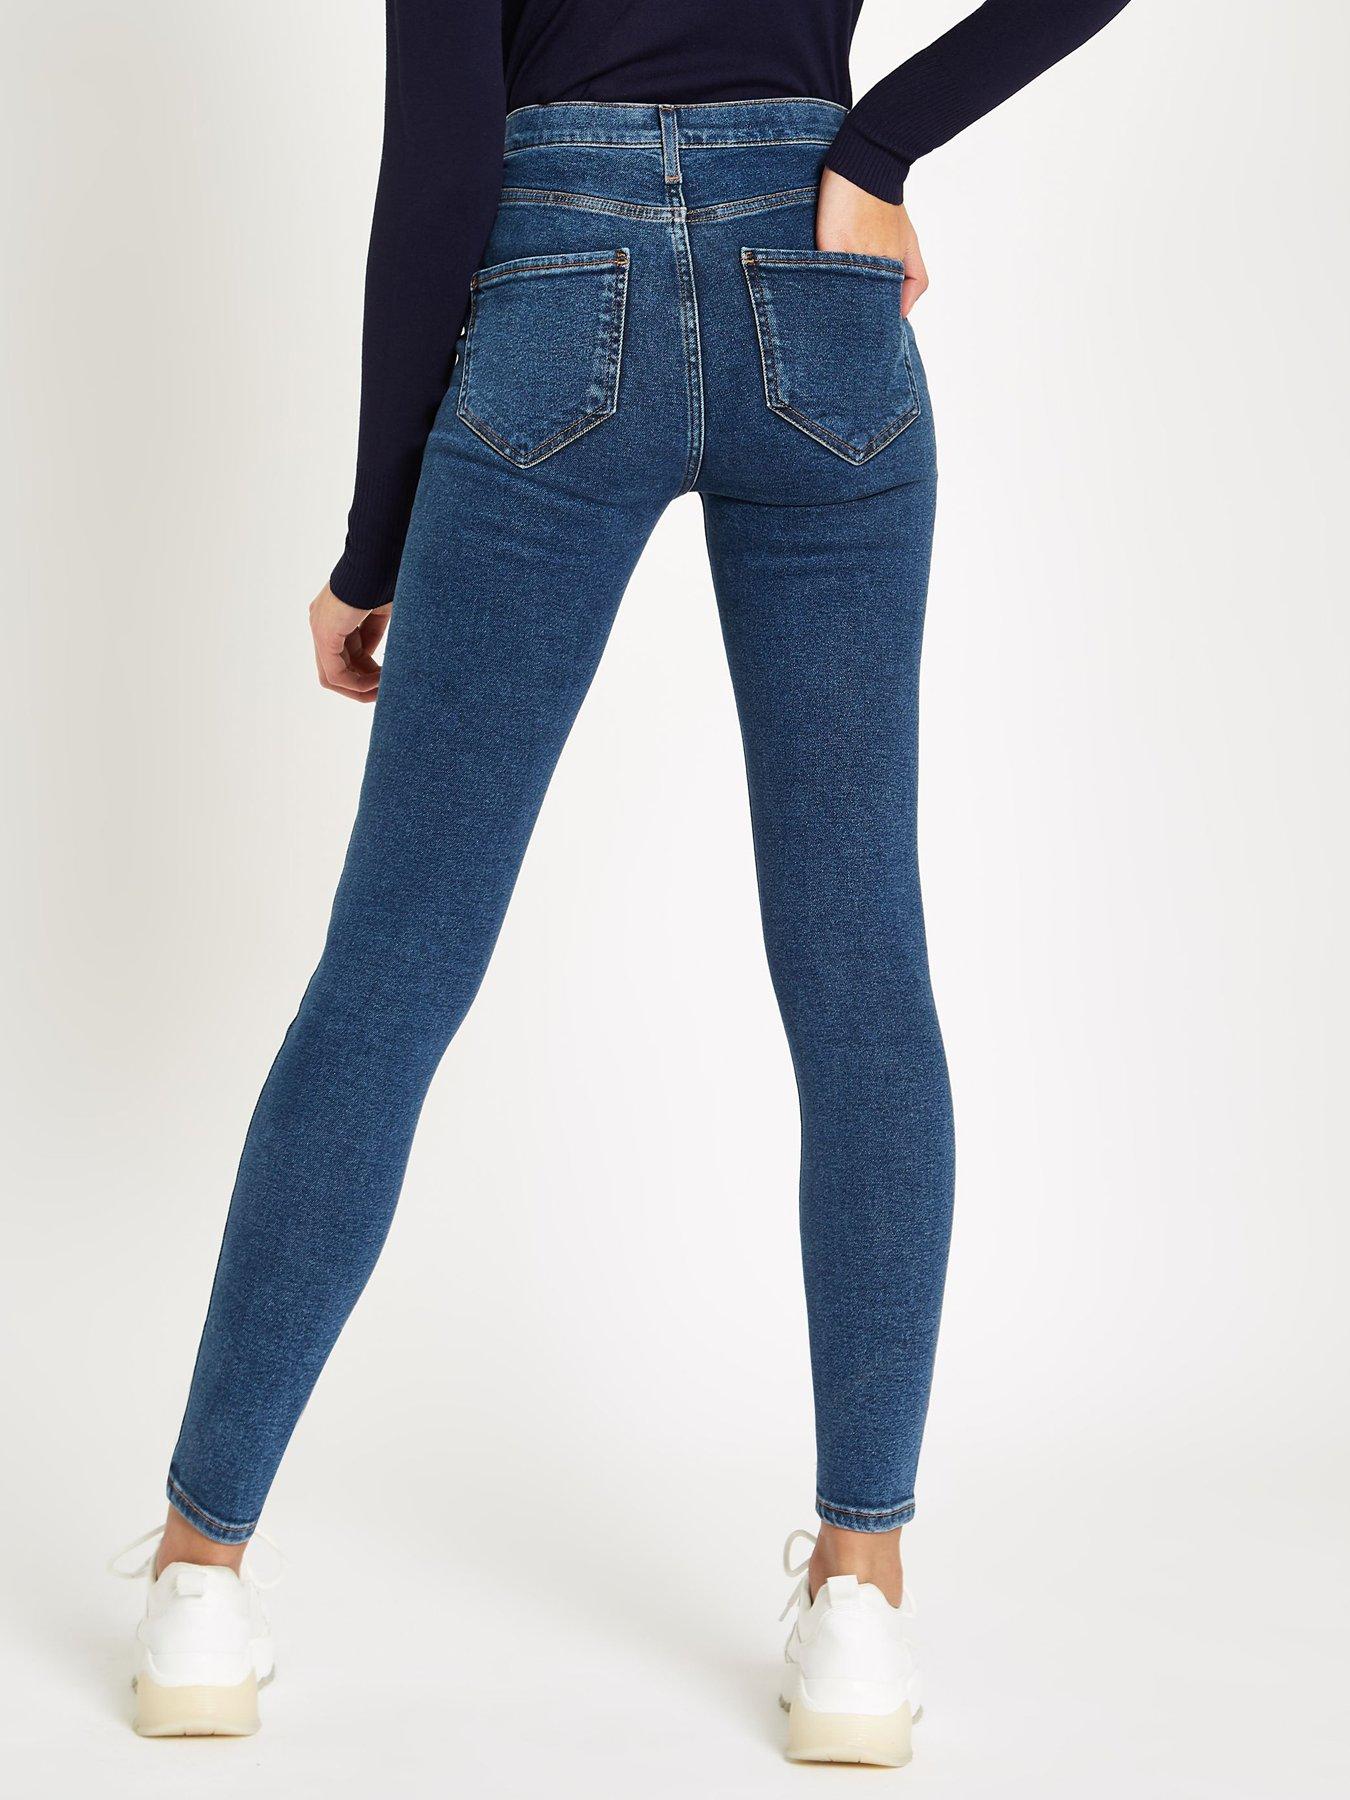 very river island jeans